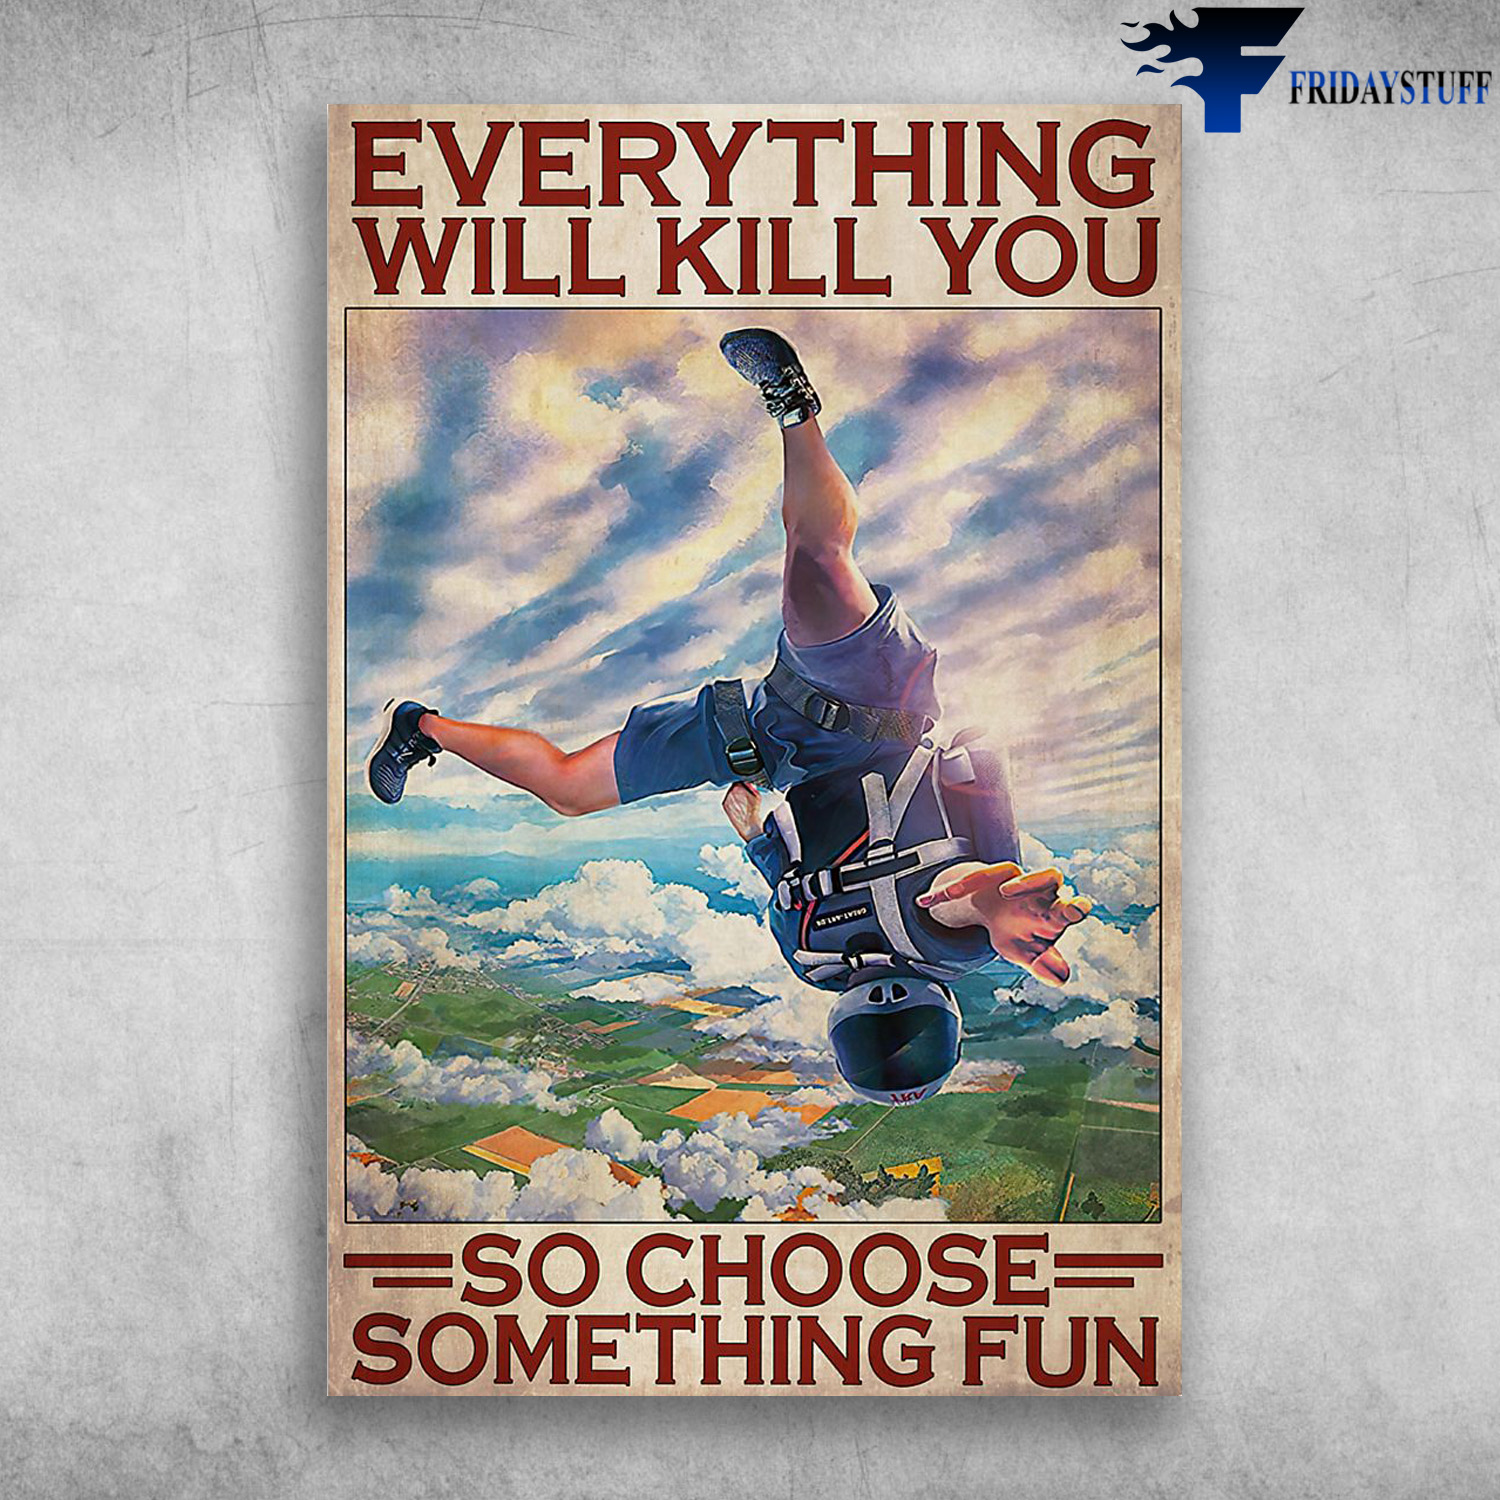 Skydiving Man In The Air - Everything Will Kill You So Choose Something Fun